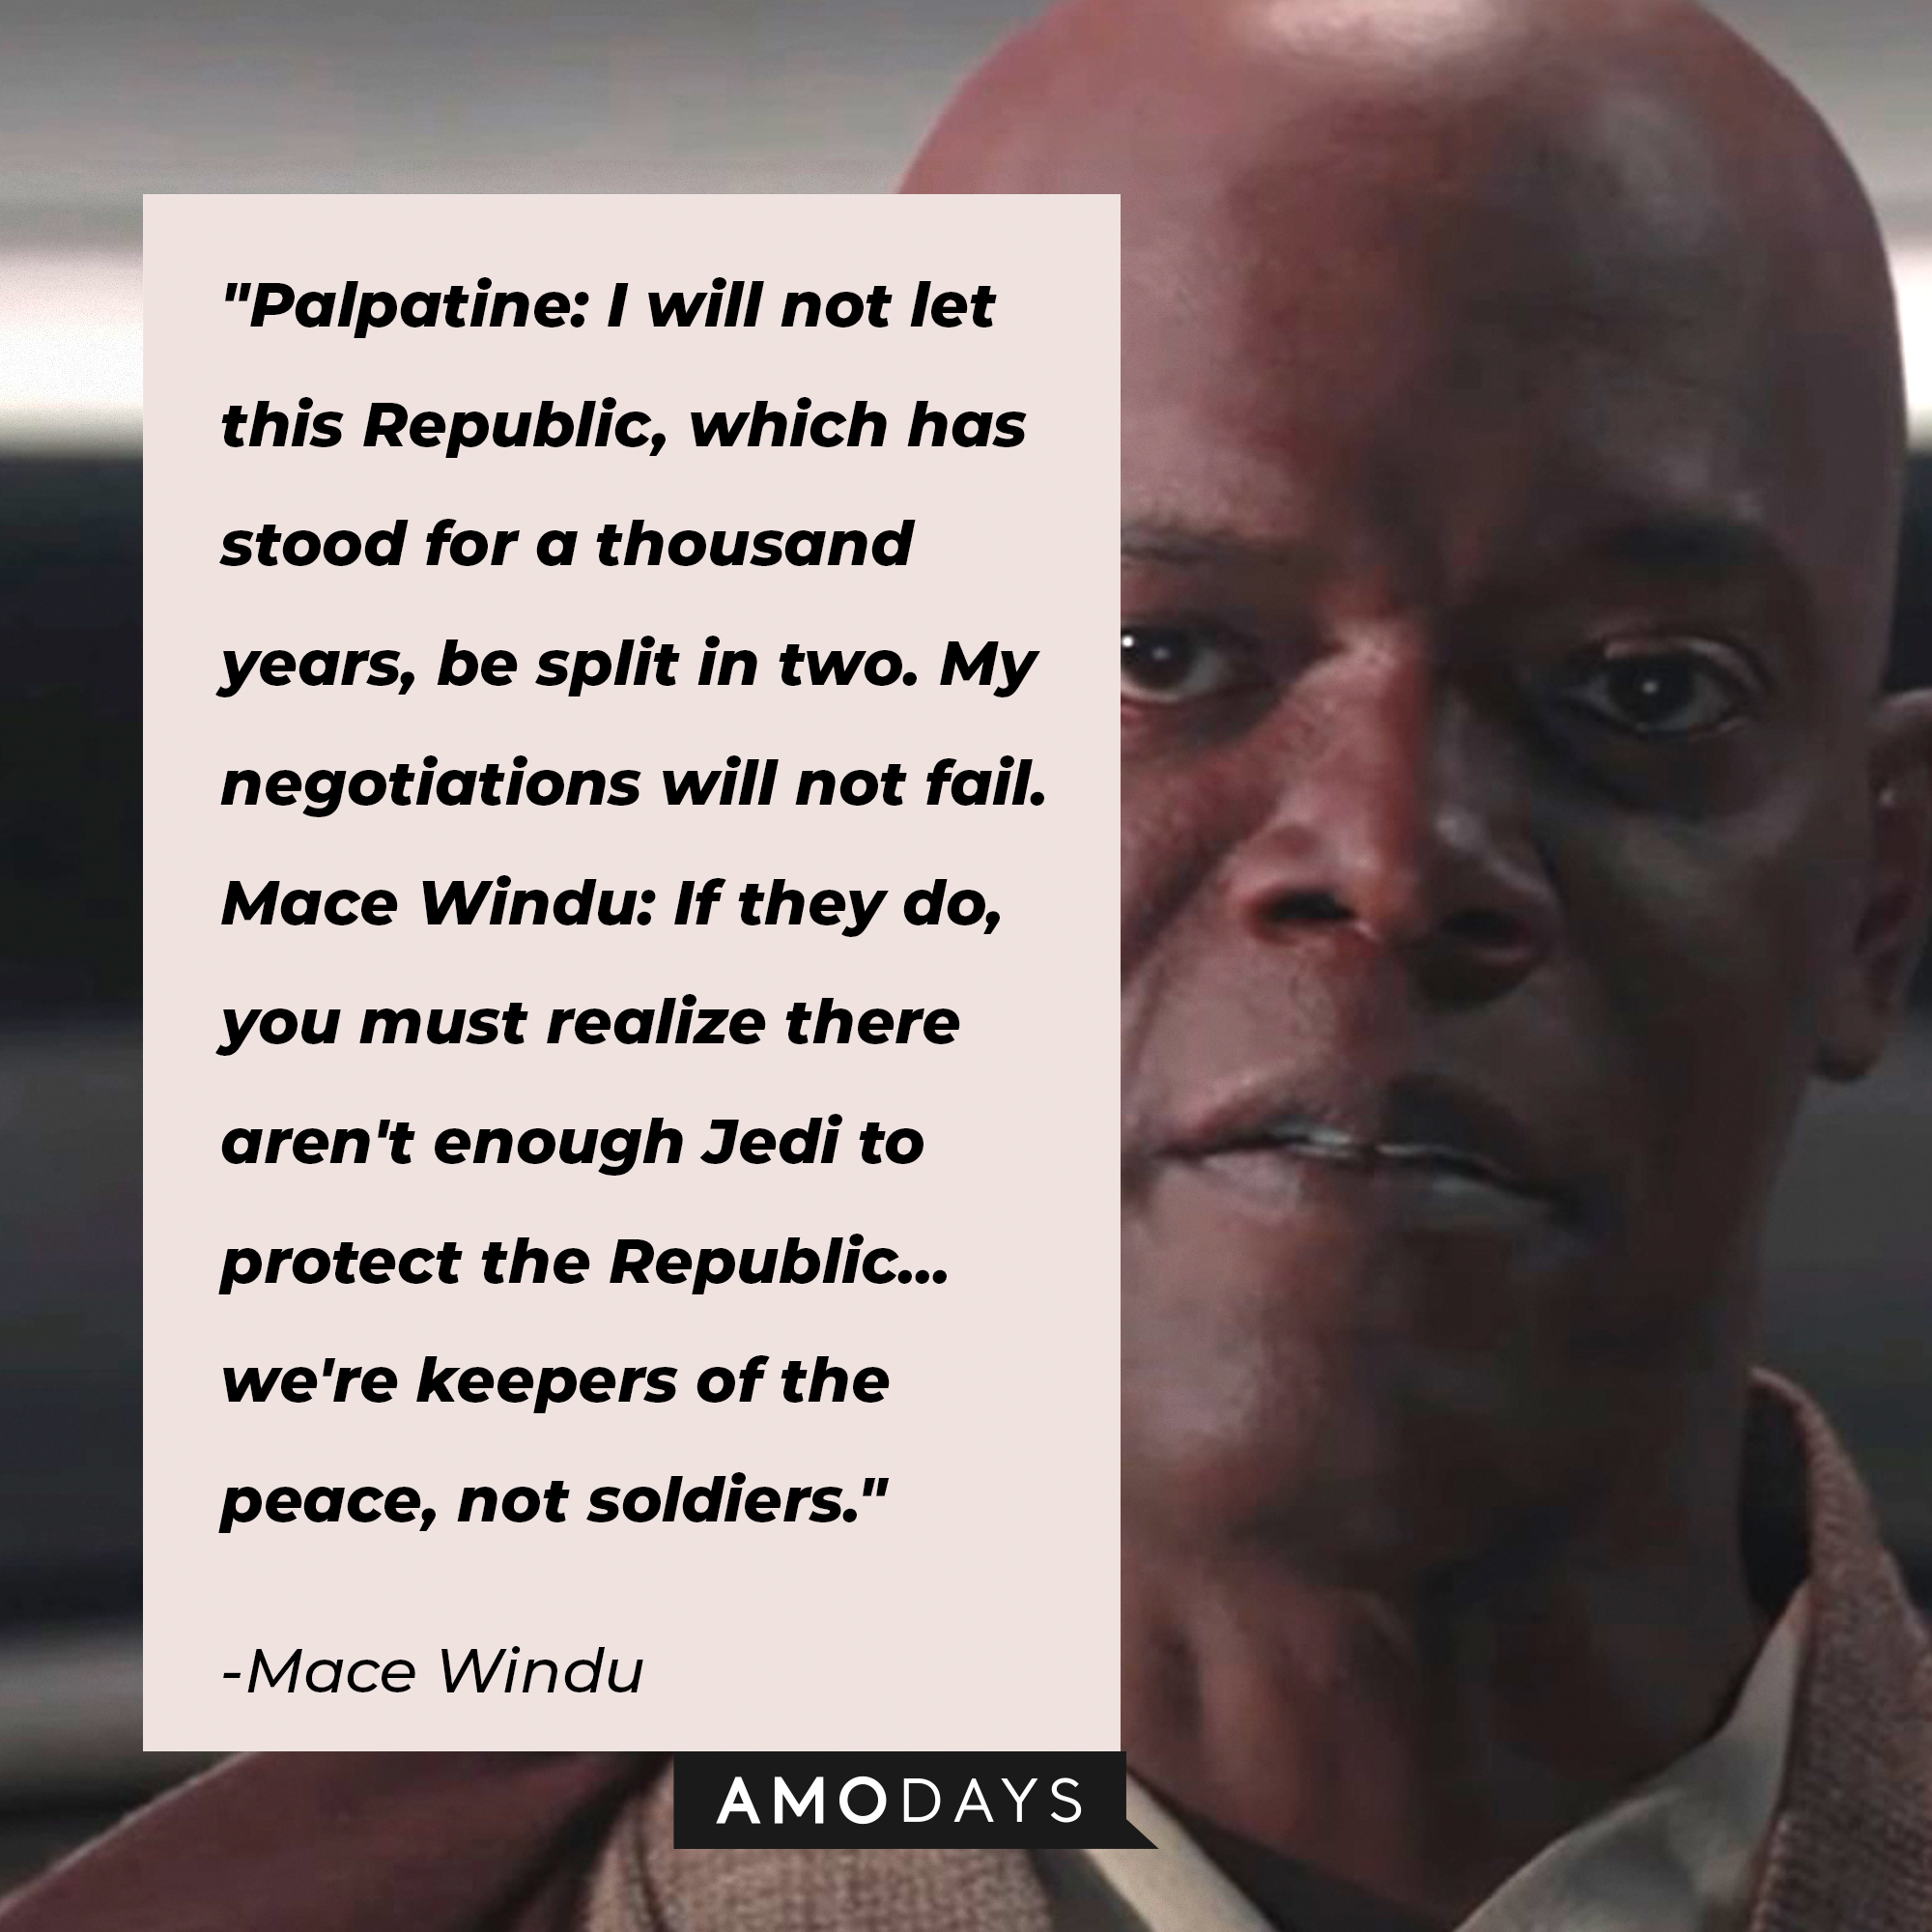 Mace Windu's quote: "Palpatine: I will not let this Republic, which has stood for a thousand years, be split in two. ; Mace Windu: If they do, you must realize there aren't enough Jedi to protect the Republic. We're keepers of the peace, not soldiers." | Image: Facebook / StarWars.UK